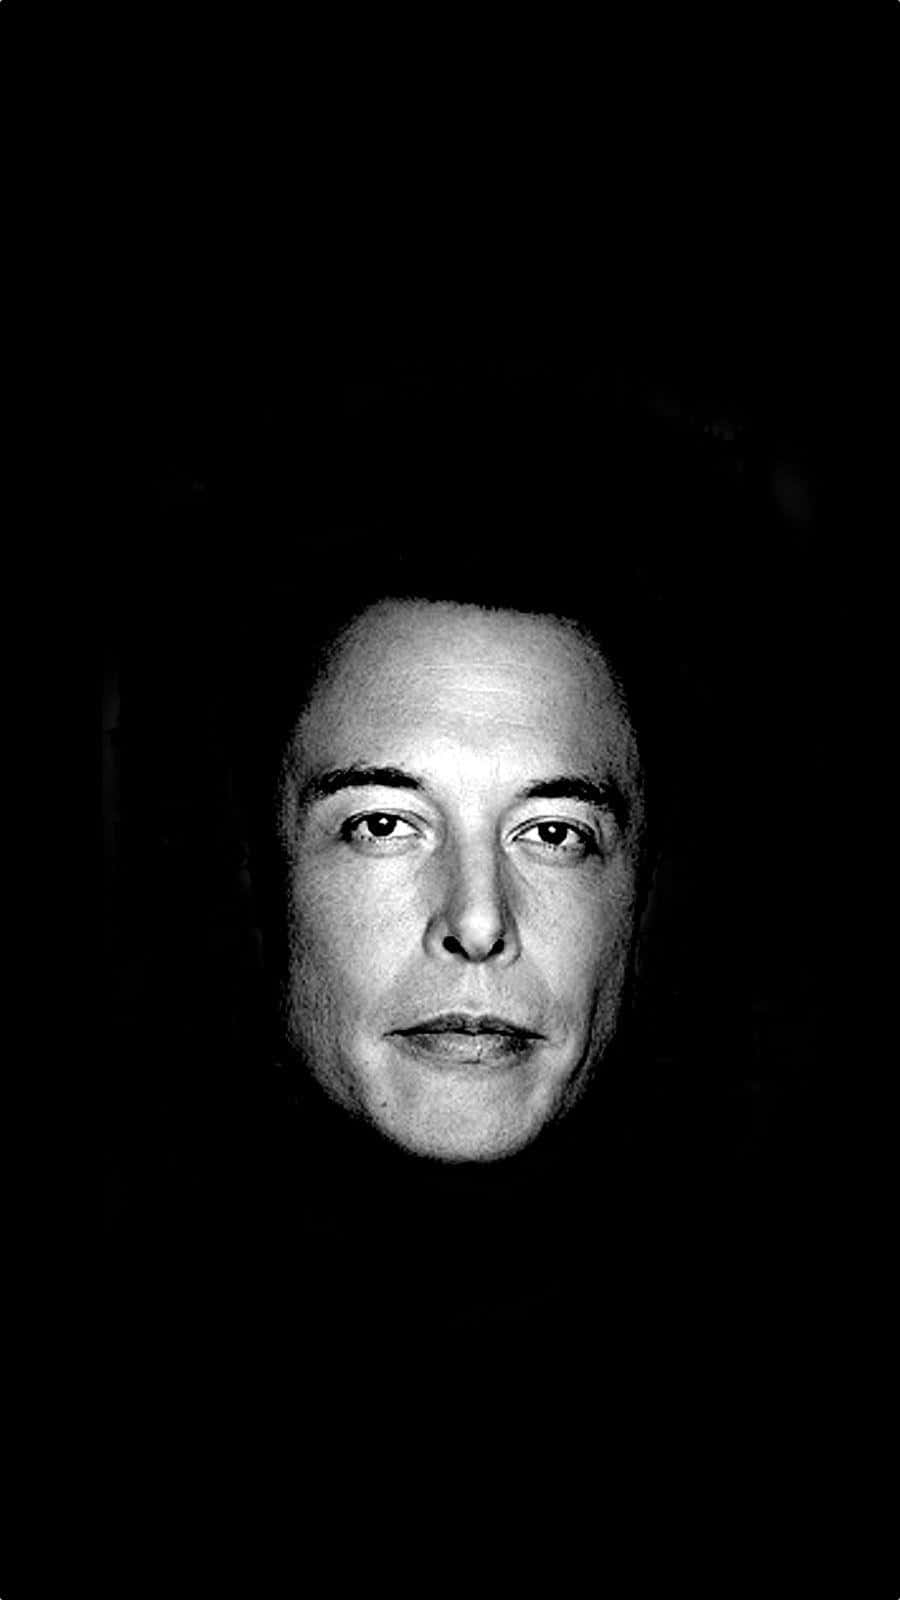 Elon Musk, CEO of Tesla and SpaceX